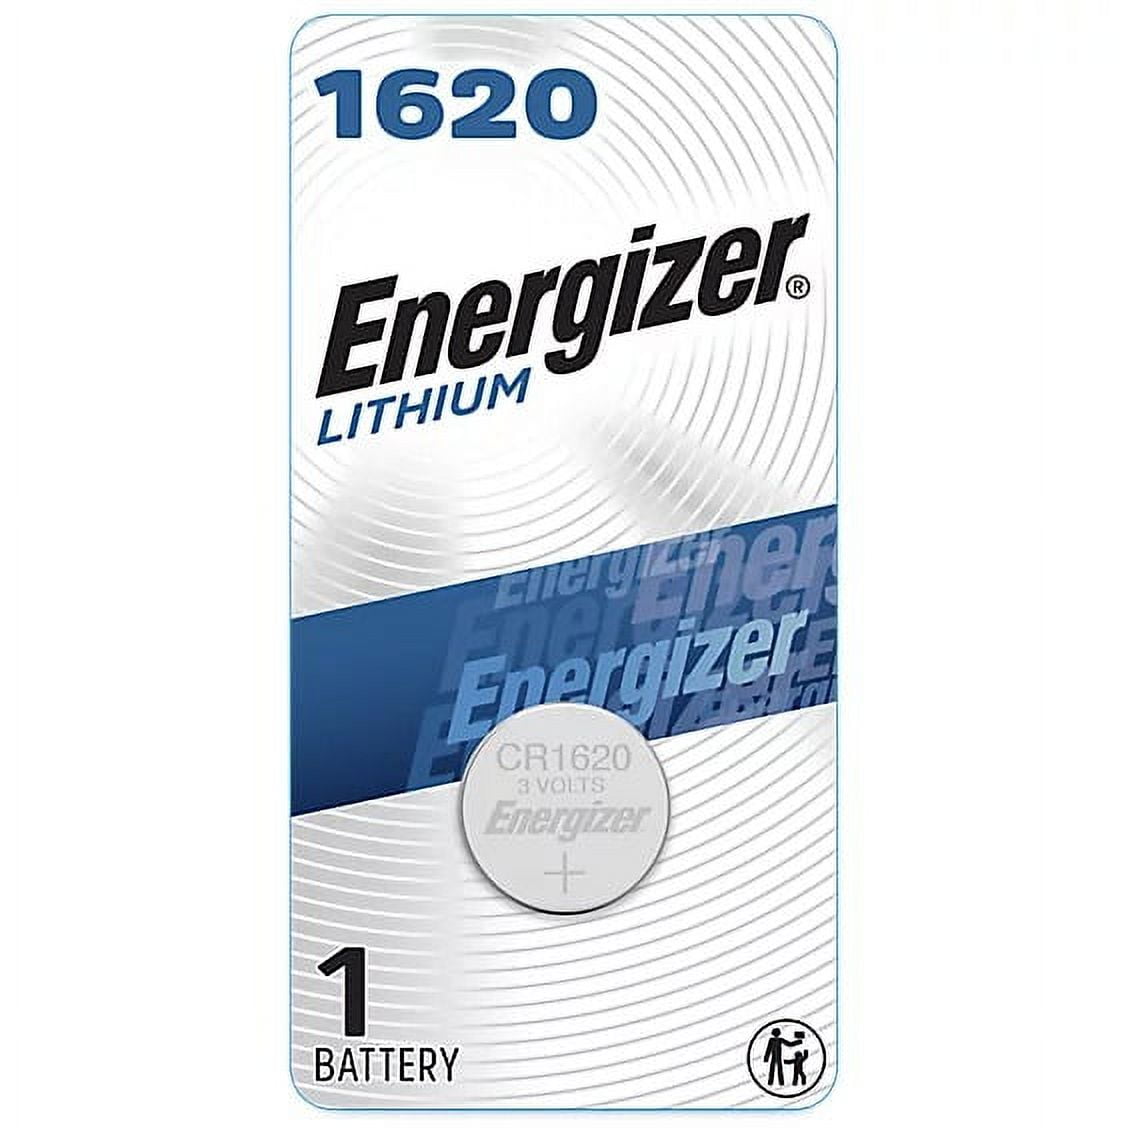 Energizer Lithium CR1620 Button Cell Battery